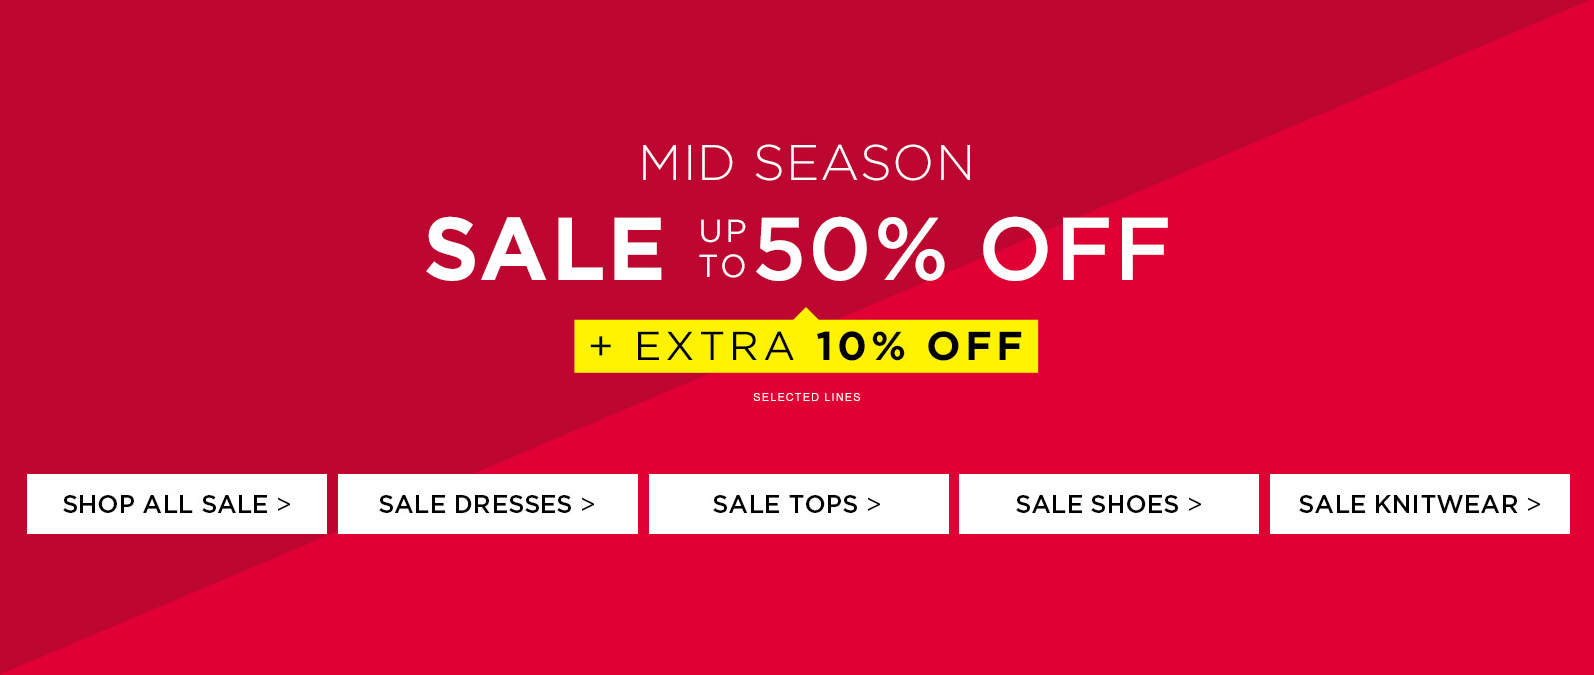 Dorothy Perkins: Mid Season Sale up to 50% off